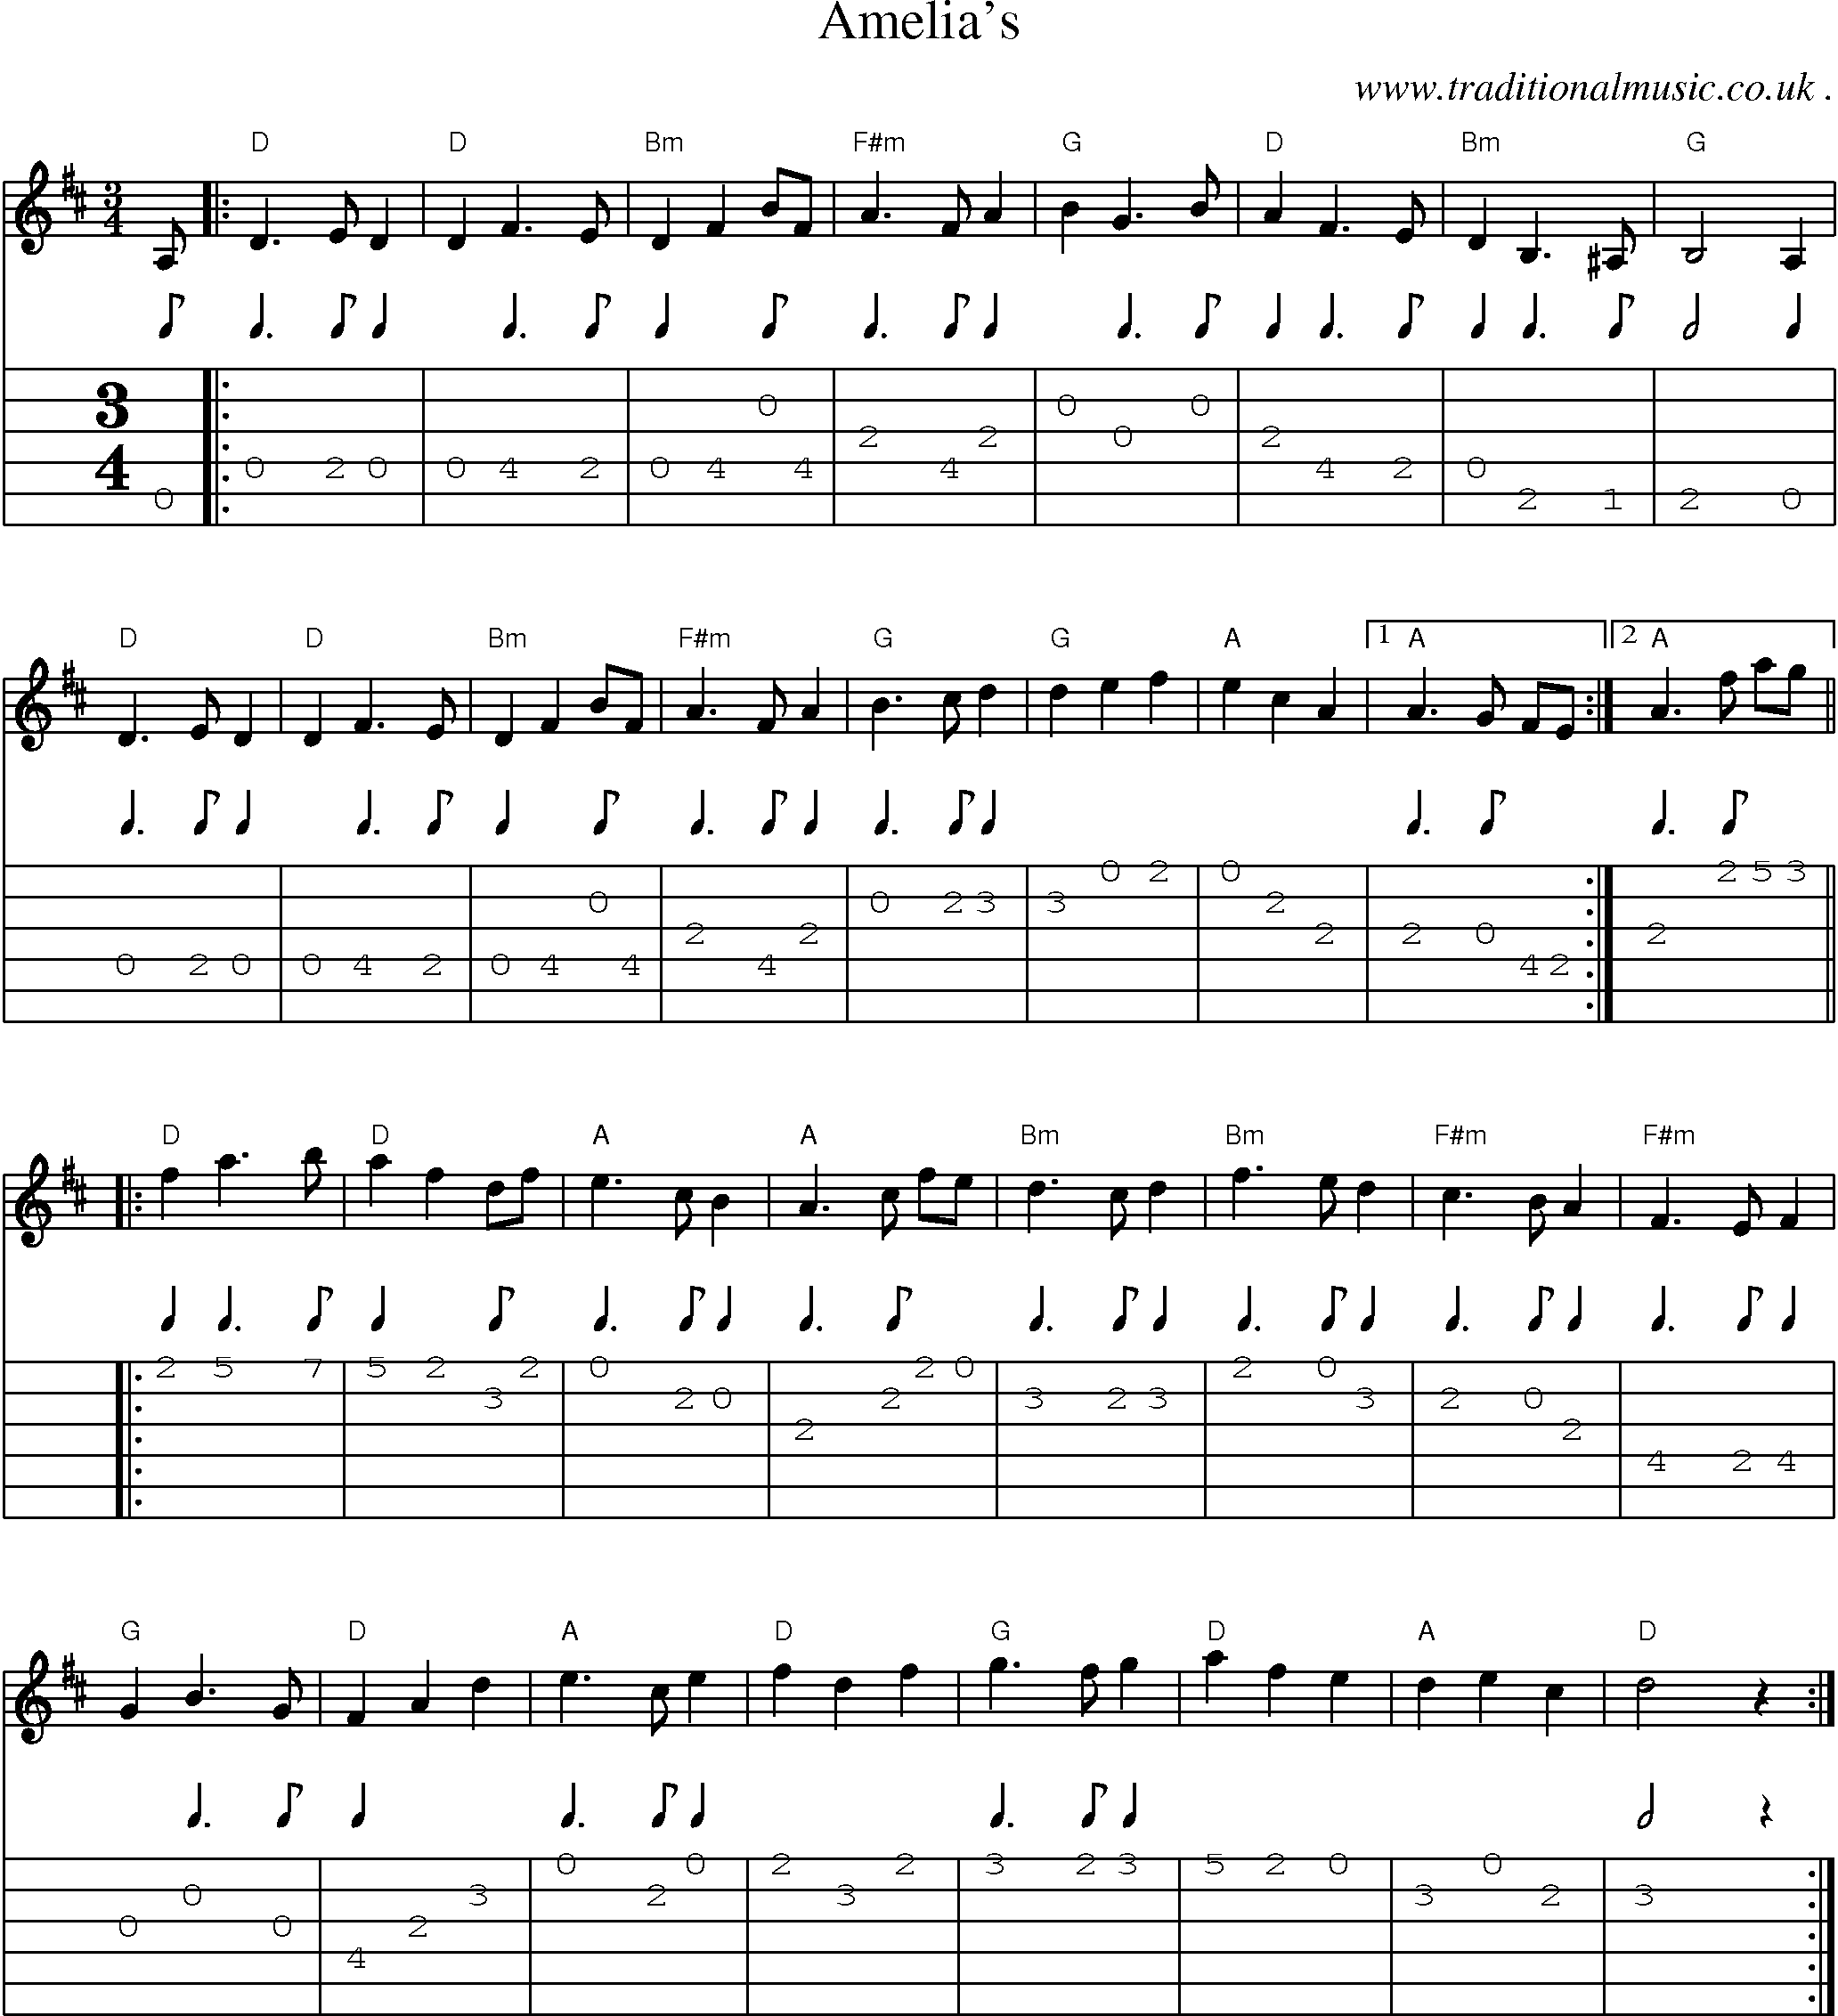 Music Score and Guitar Tabs for Amelias